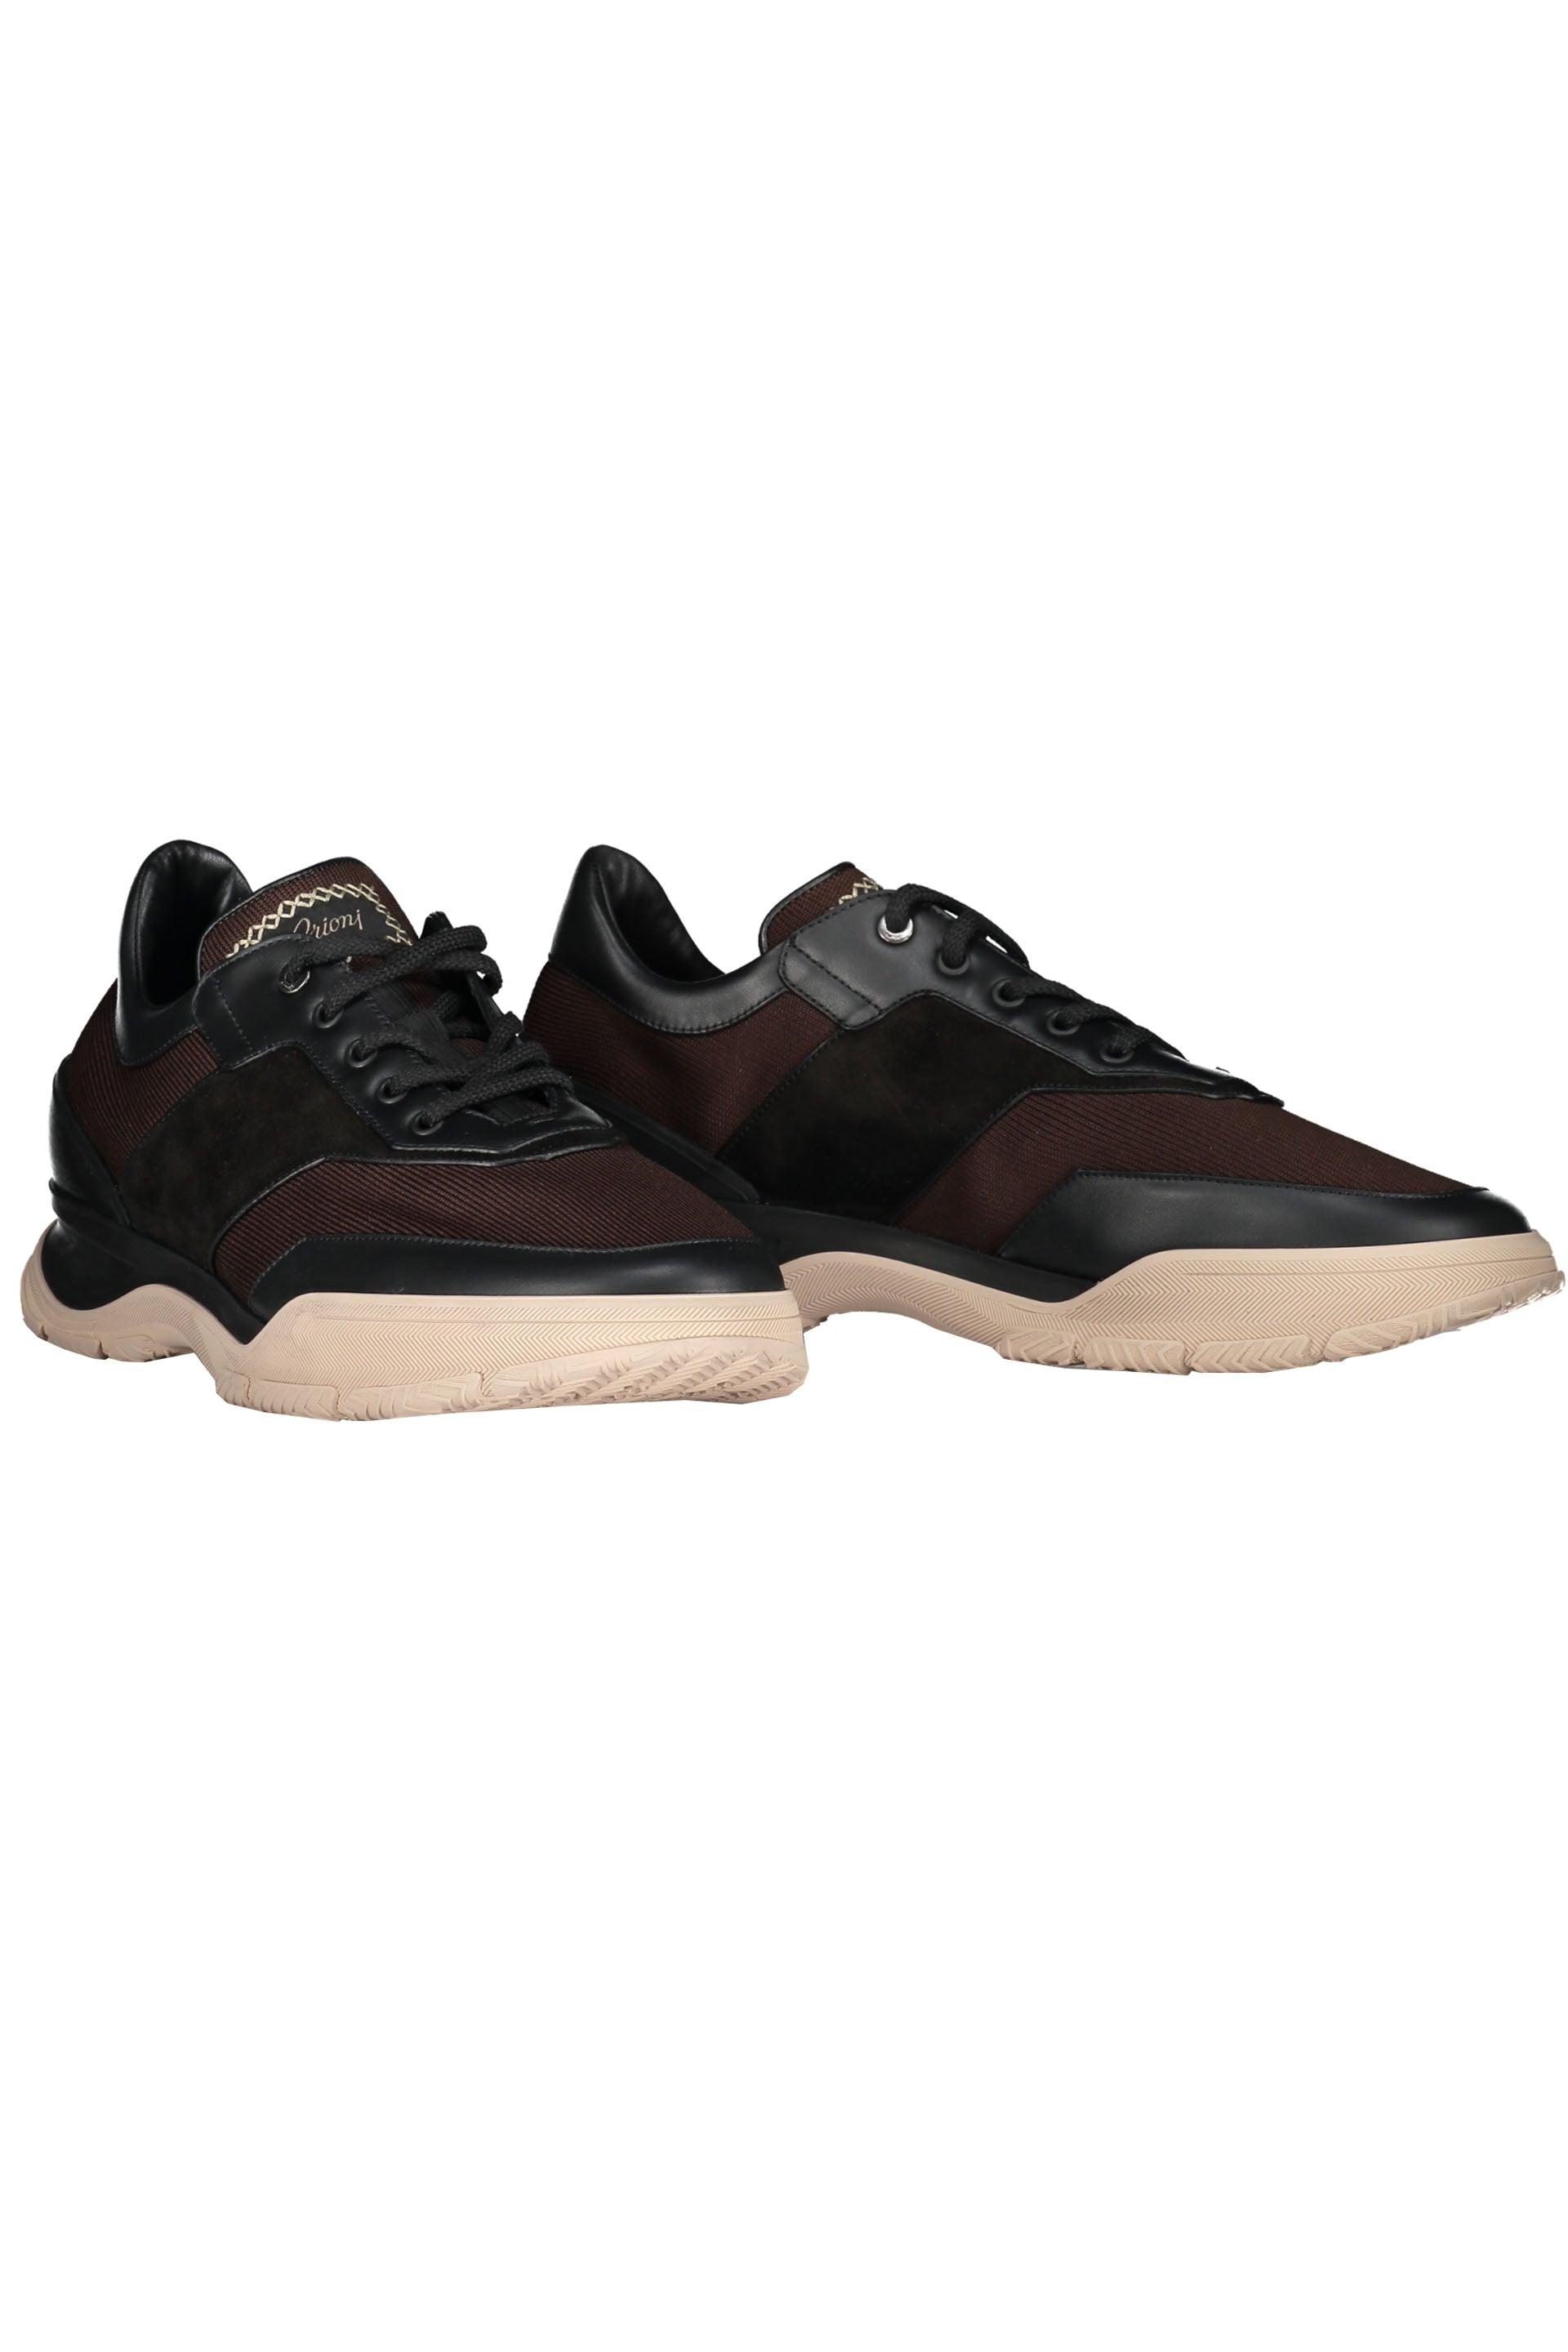 Brioni Leather Sneakers in Black for Men | Lyst